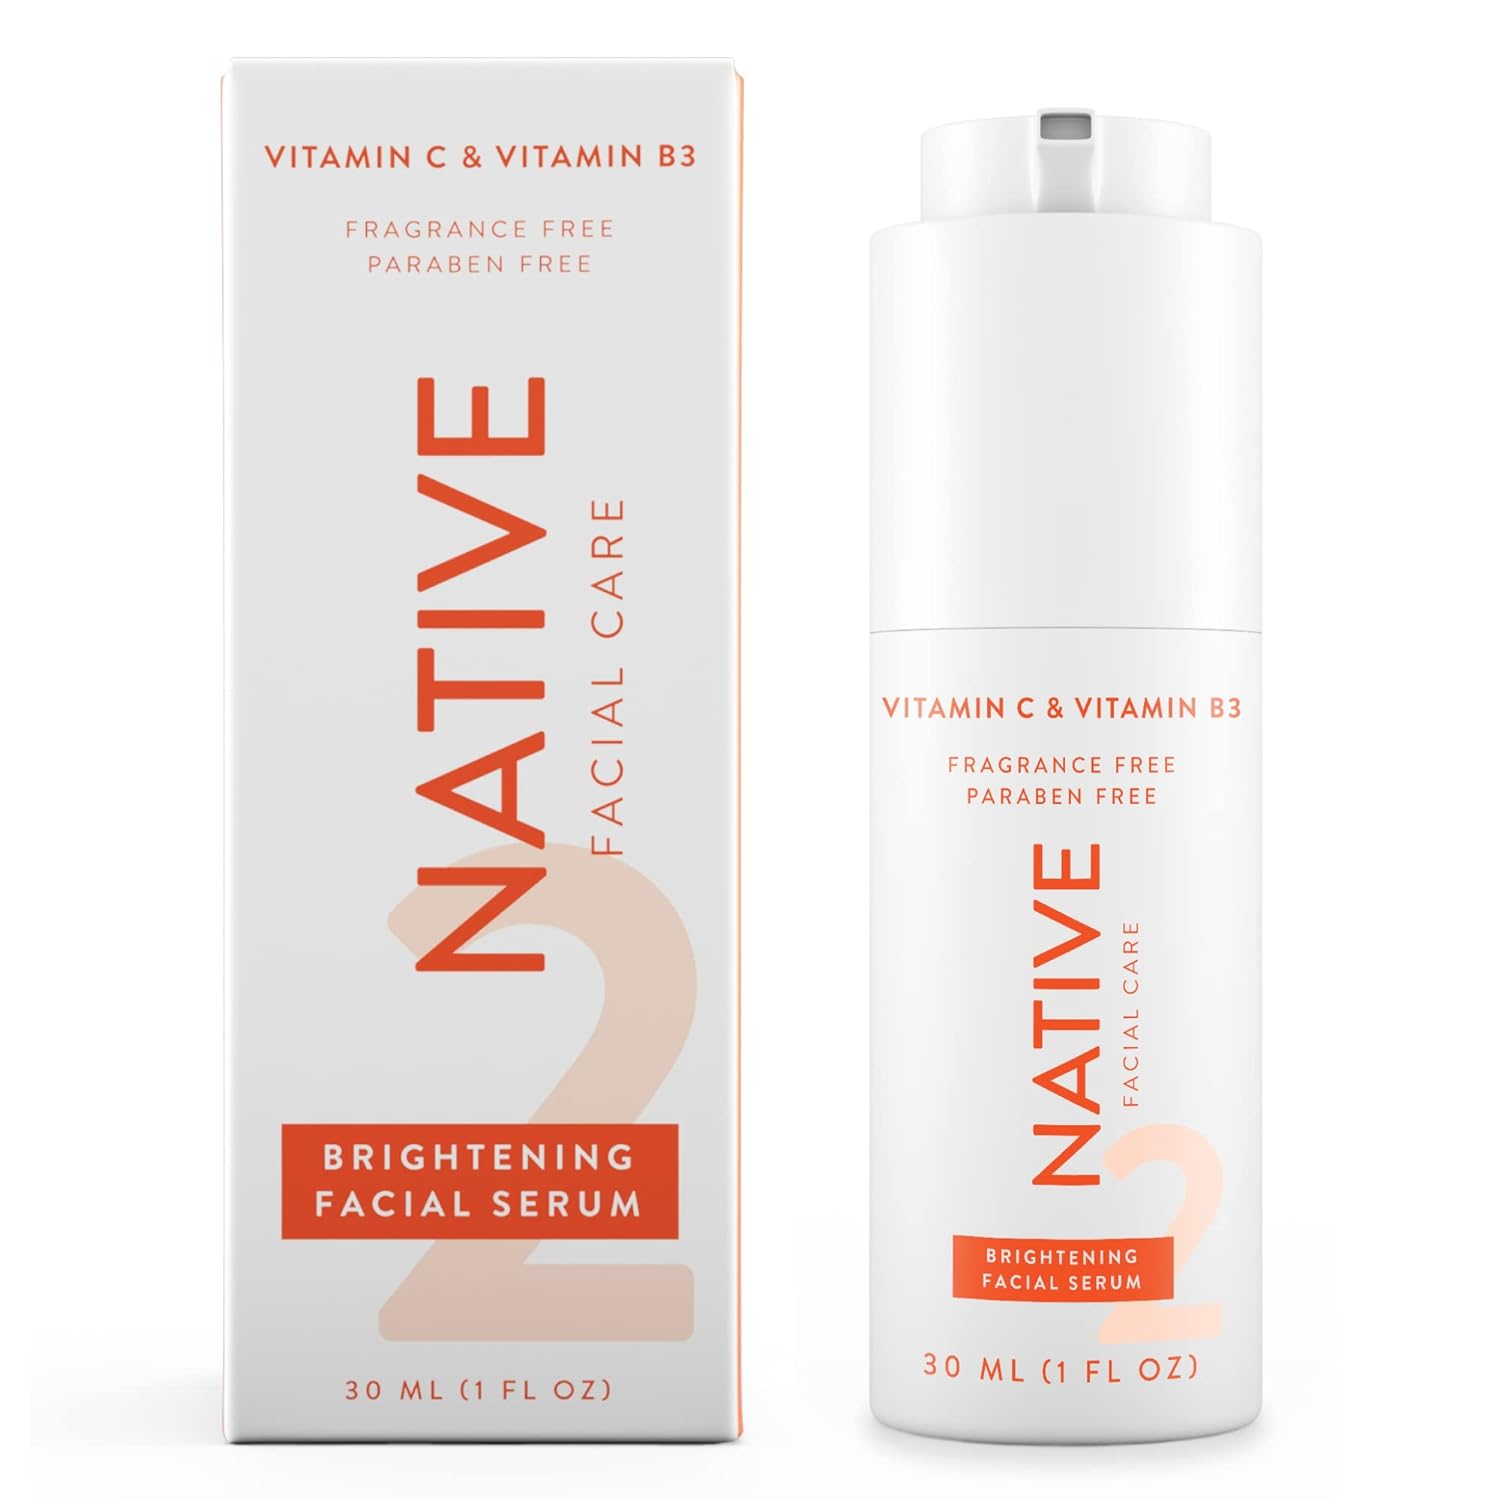 Native Brightening Facial Serum, Hydrating Serum with Vitamin C and Niacinamide, Vitamin B3, Revitalize and Repair Your Skin, Fragrance-Free, 30, 1